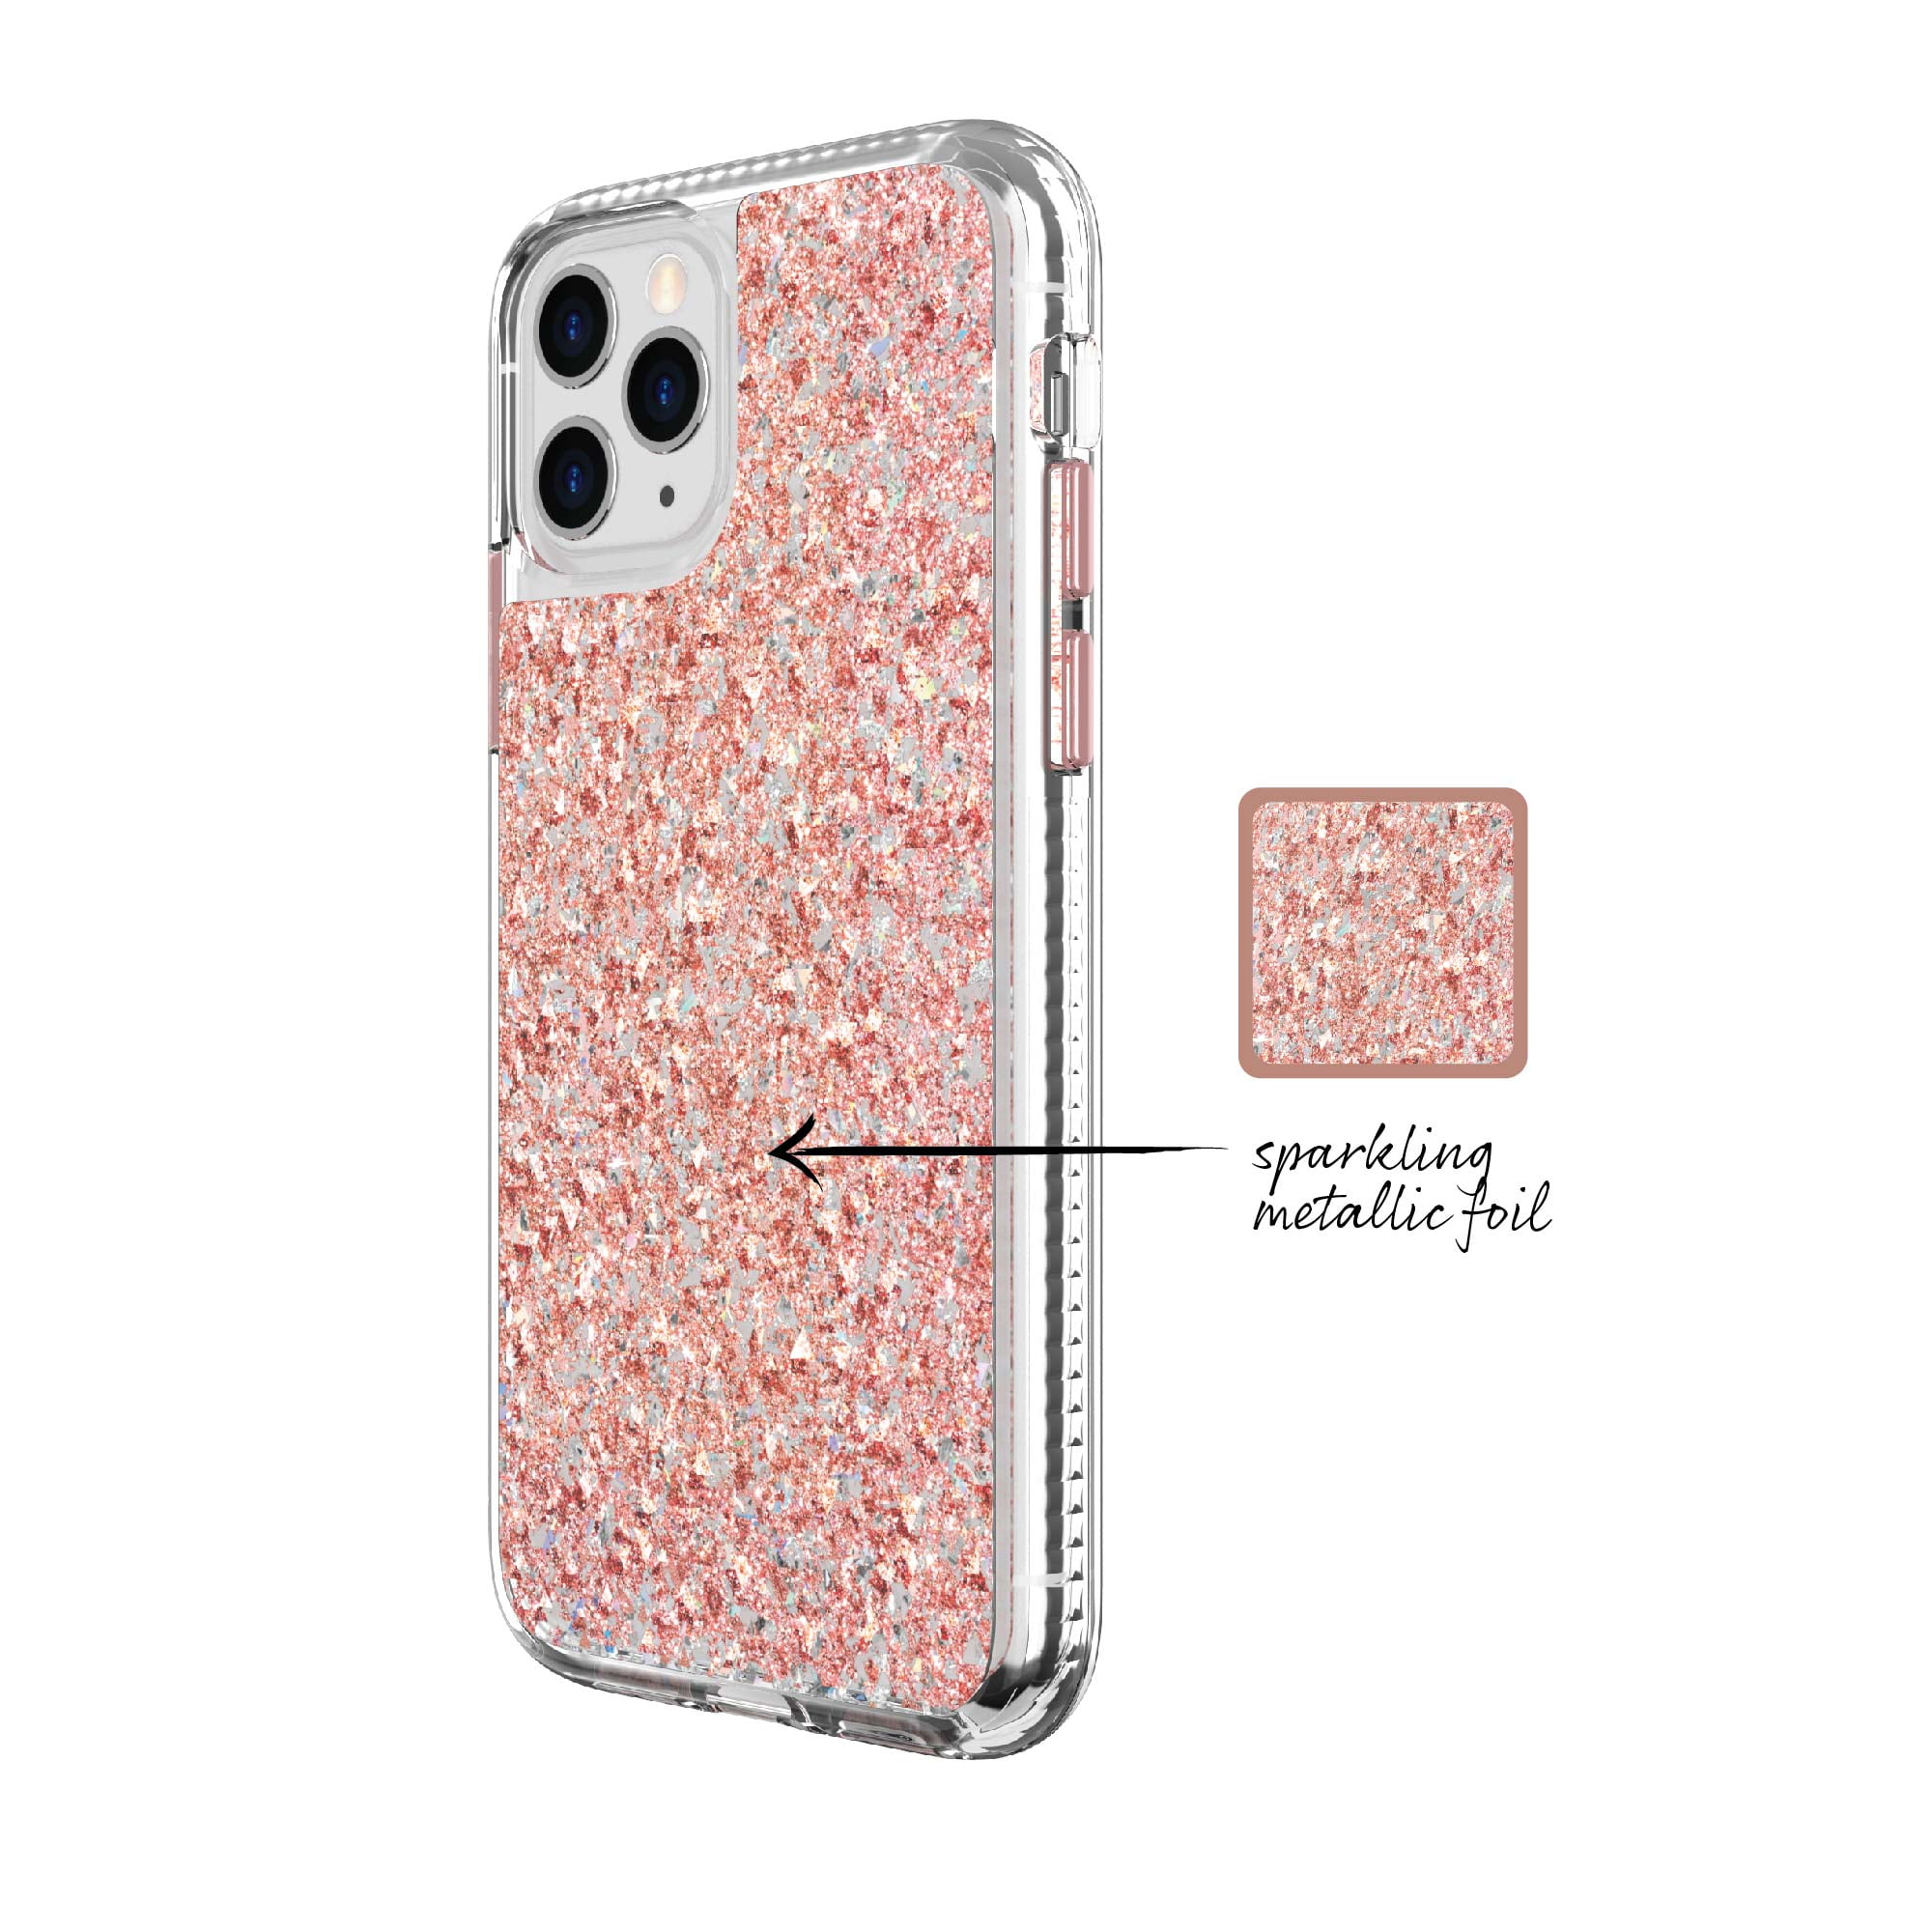 Blush Gold Fleck Phone Case for iPhone 11 Pro Max